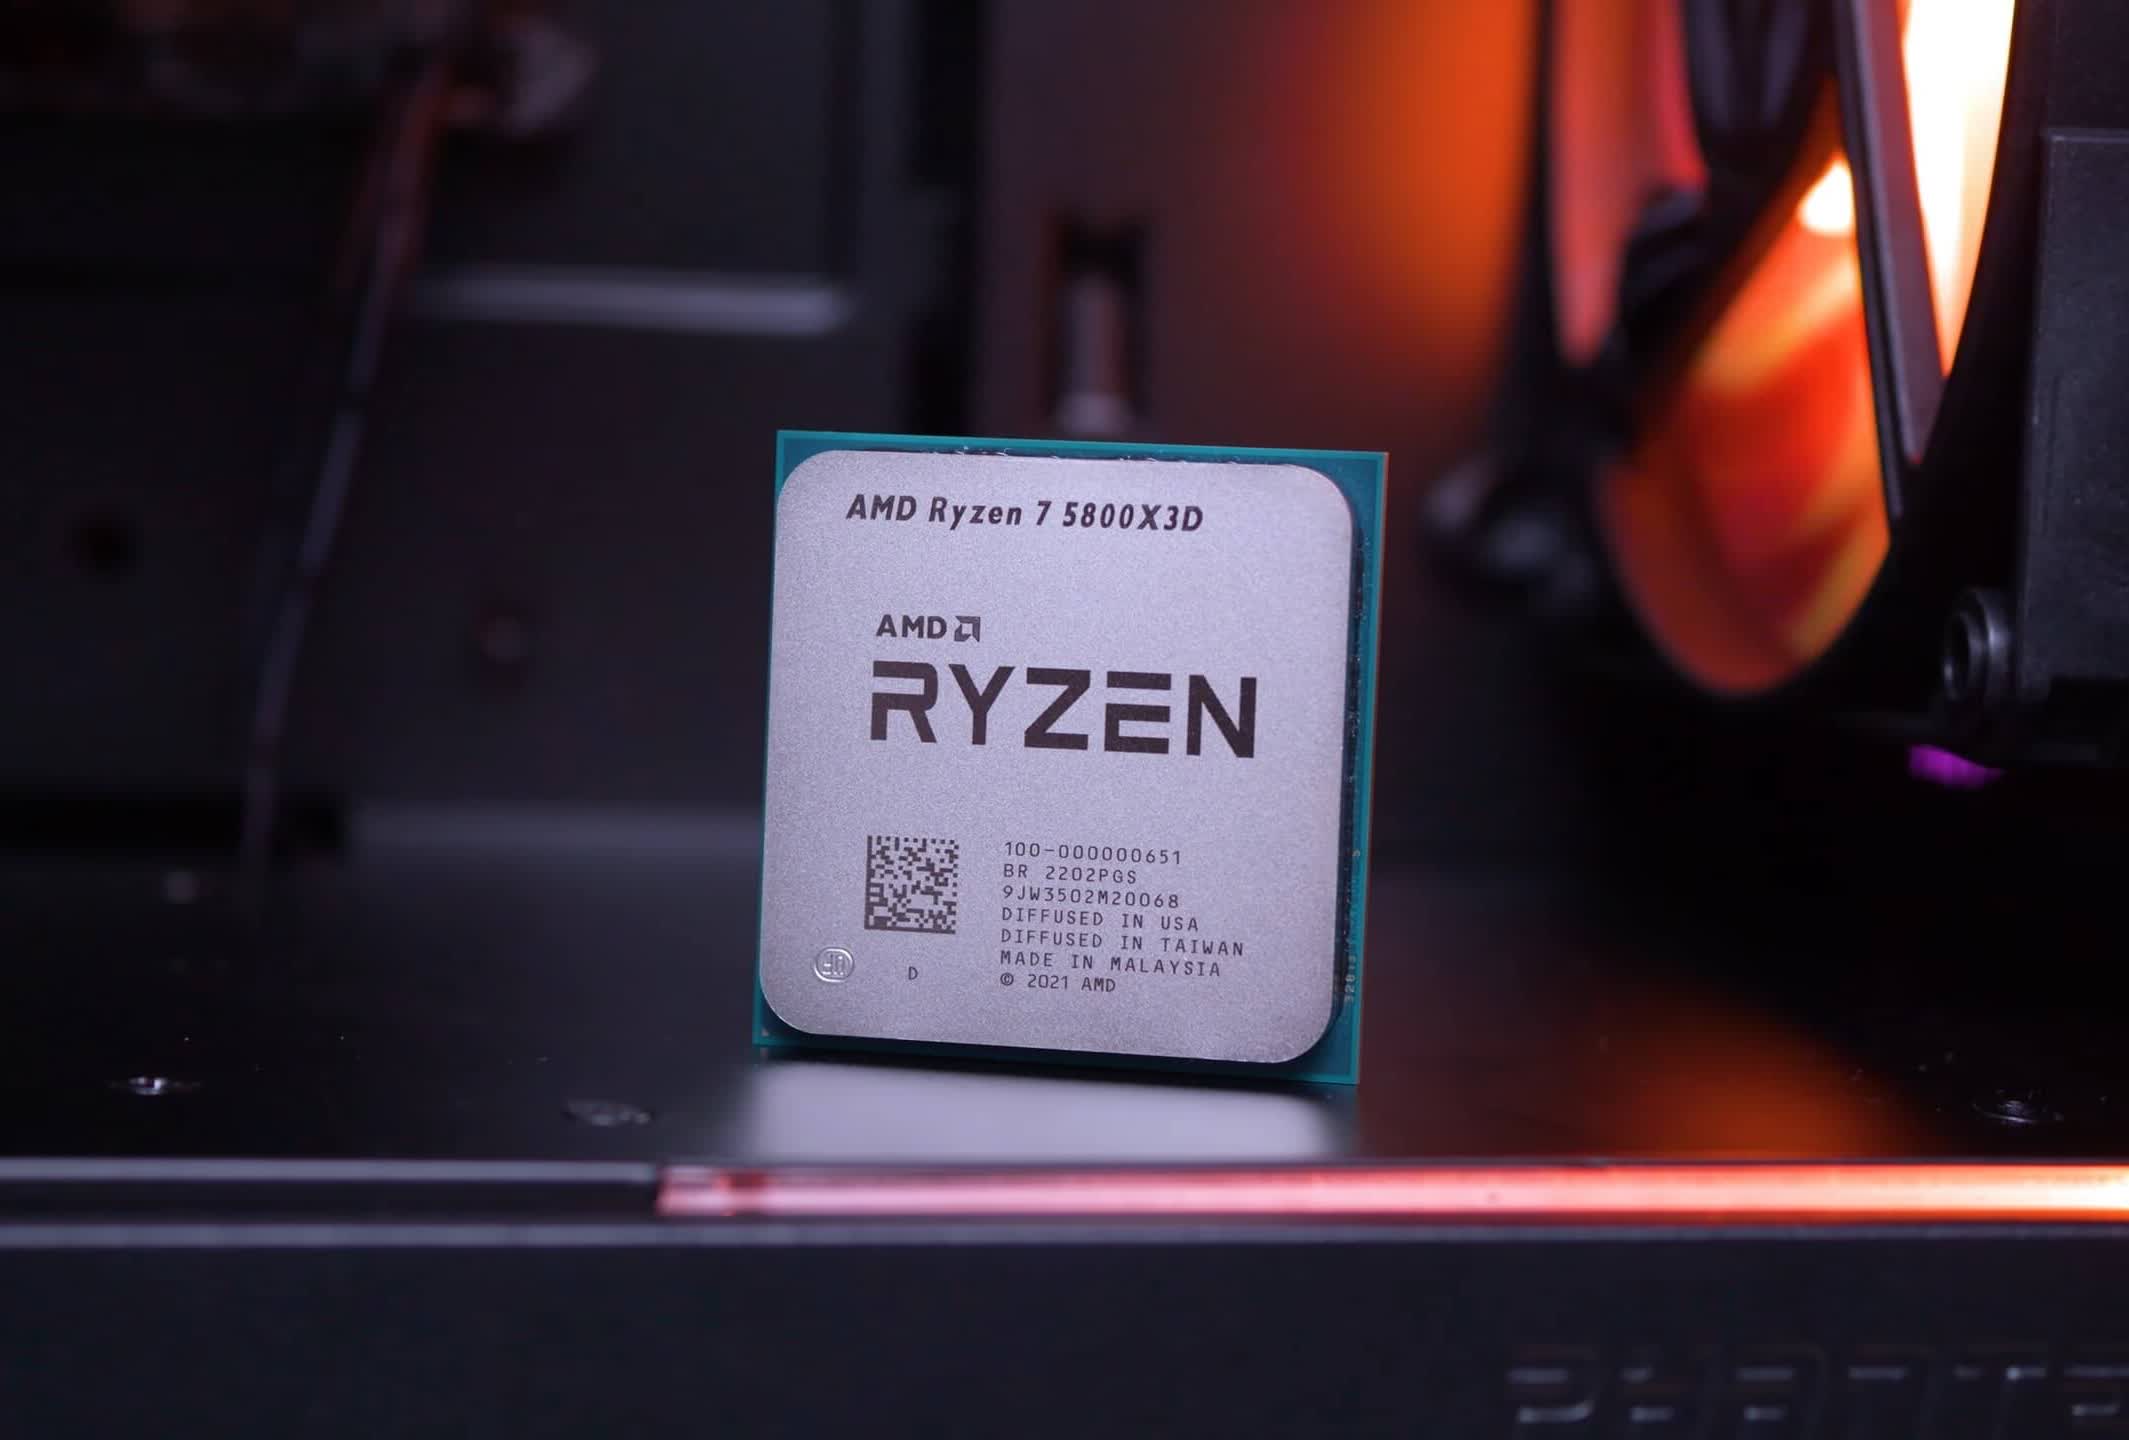 Retailer in Canada puts pricey AMD Ryzen 9 7950X and 7900X up for pre-order